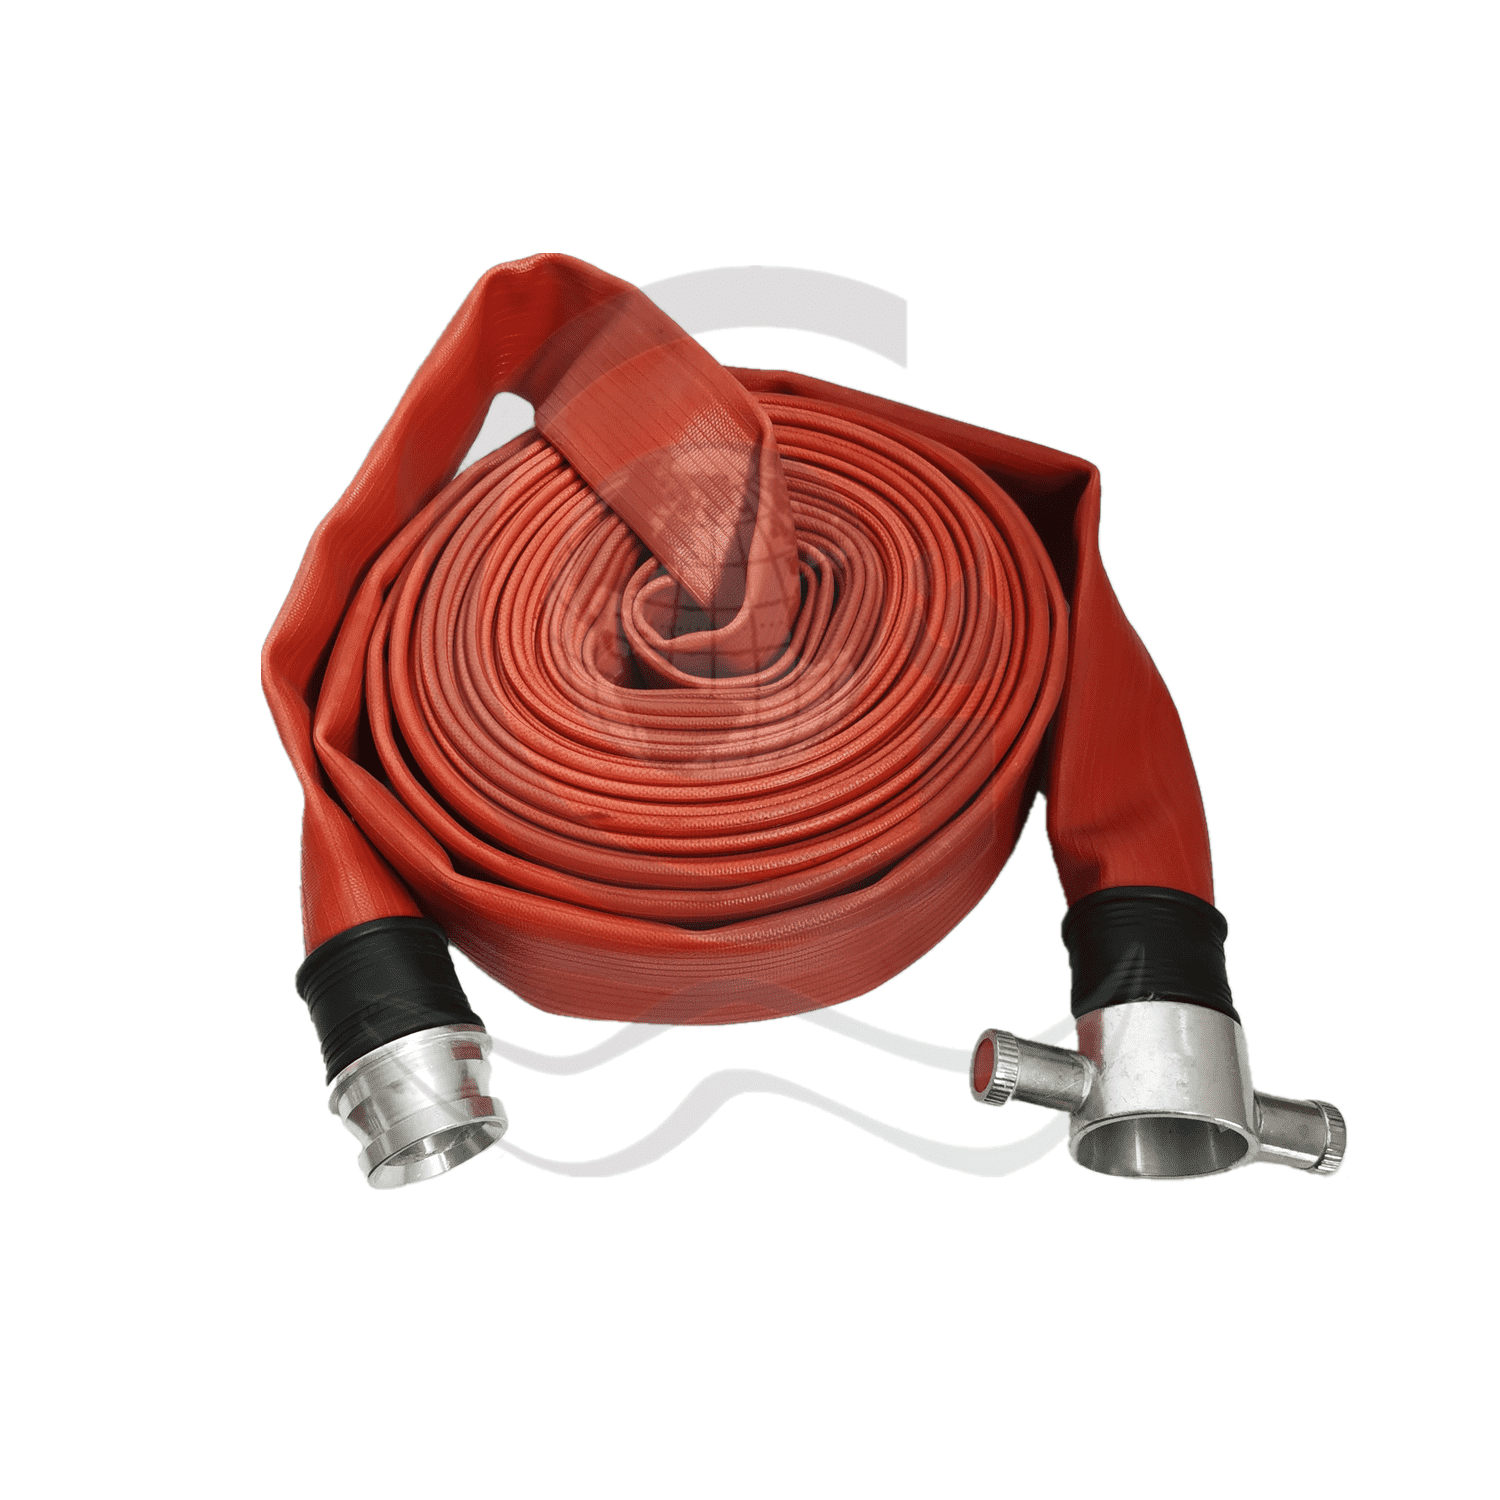 China duraline fire hose Manufacture and Factory